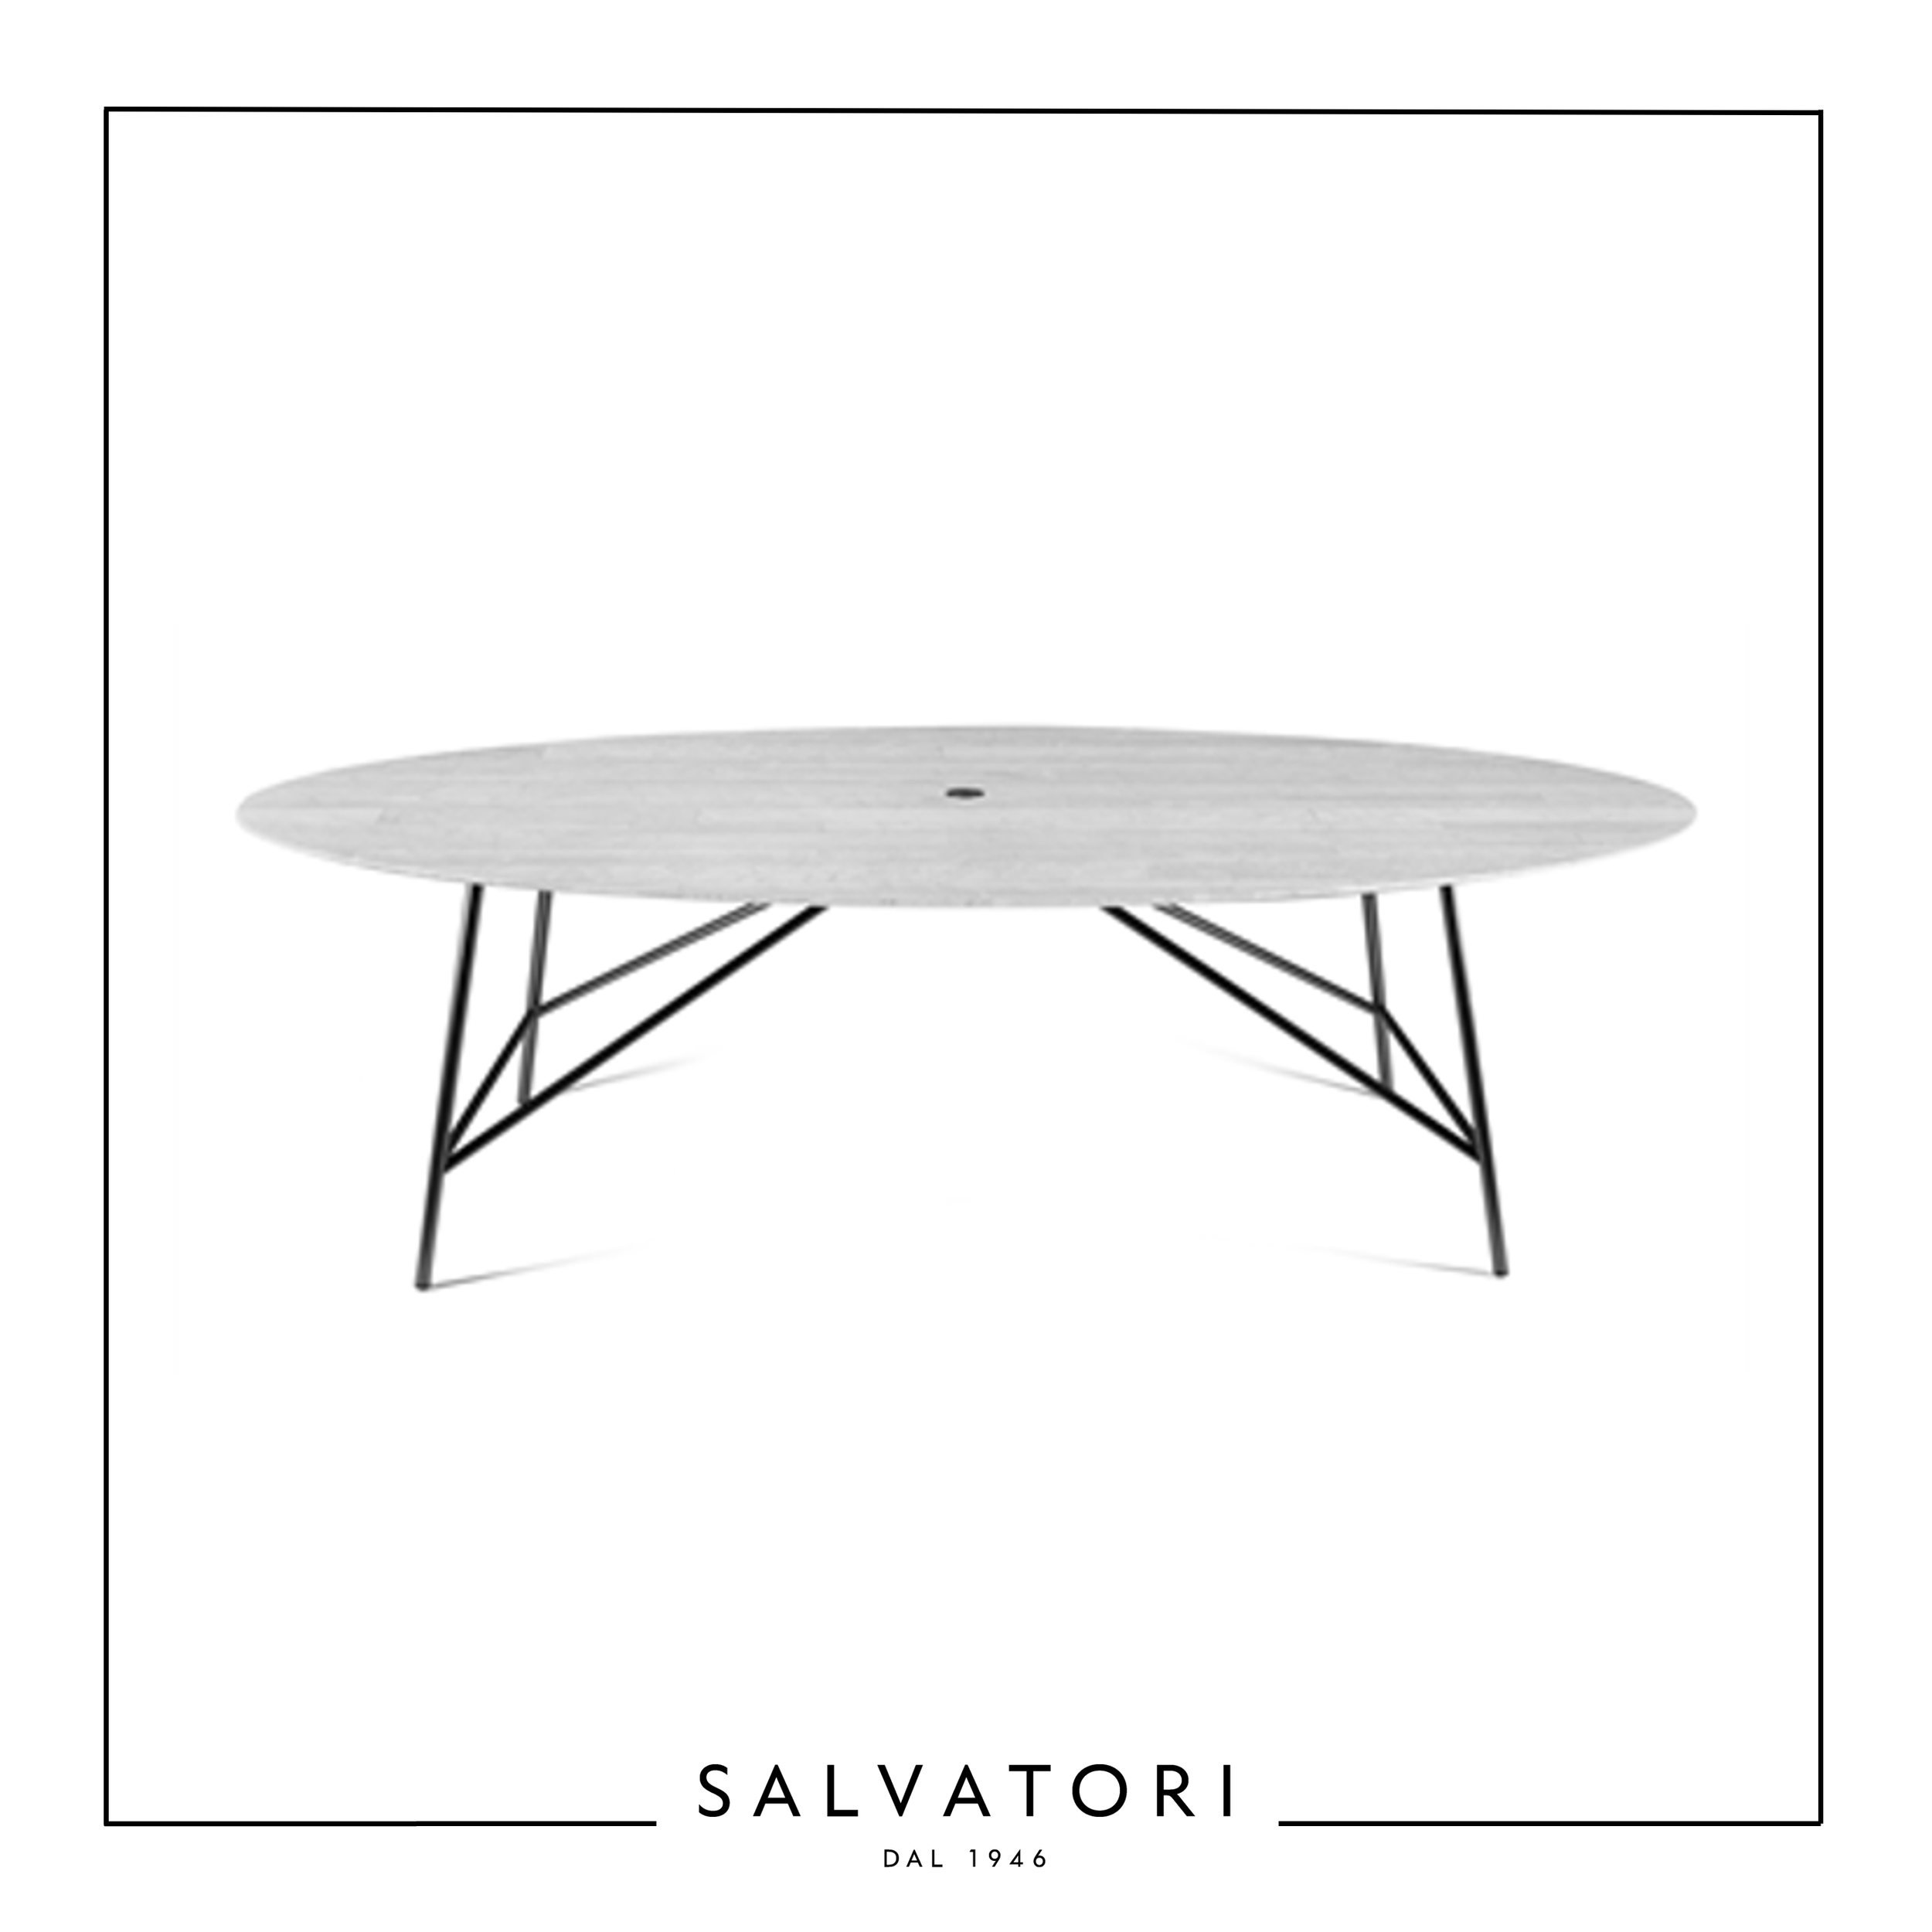 DRITTO OVAL DINING TABLE